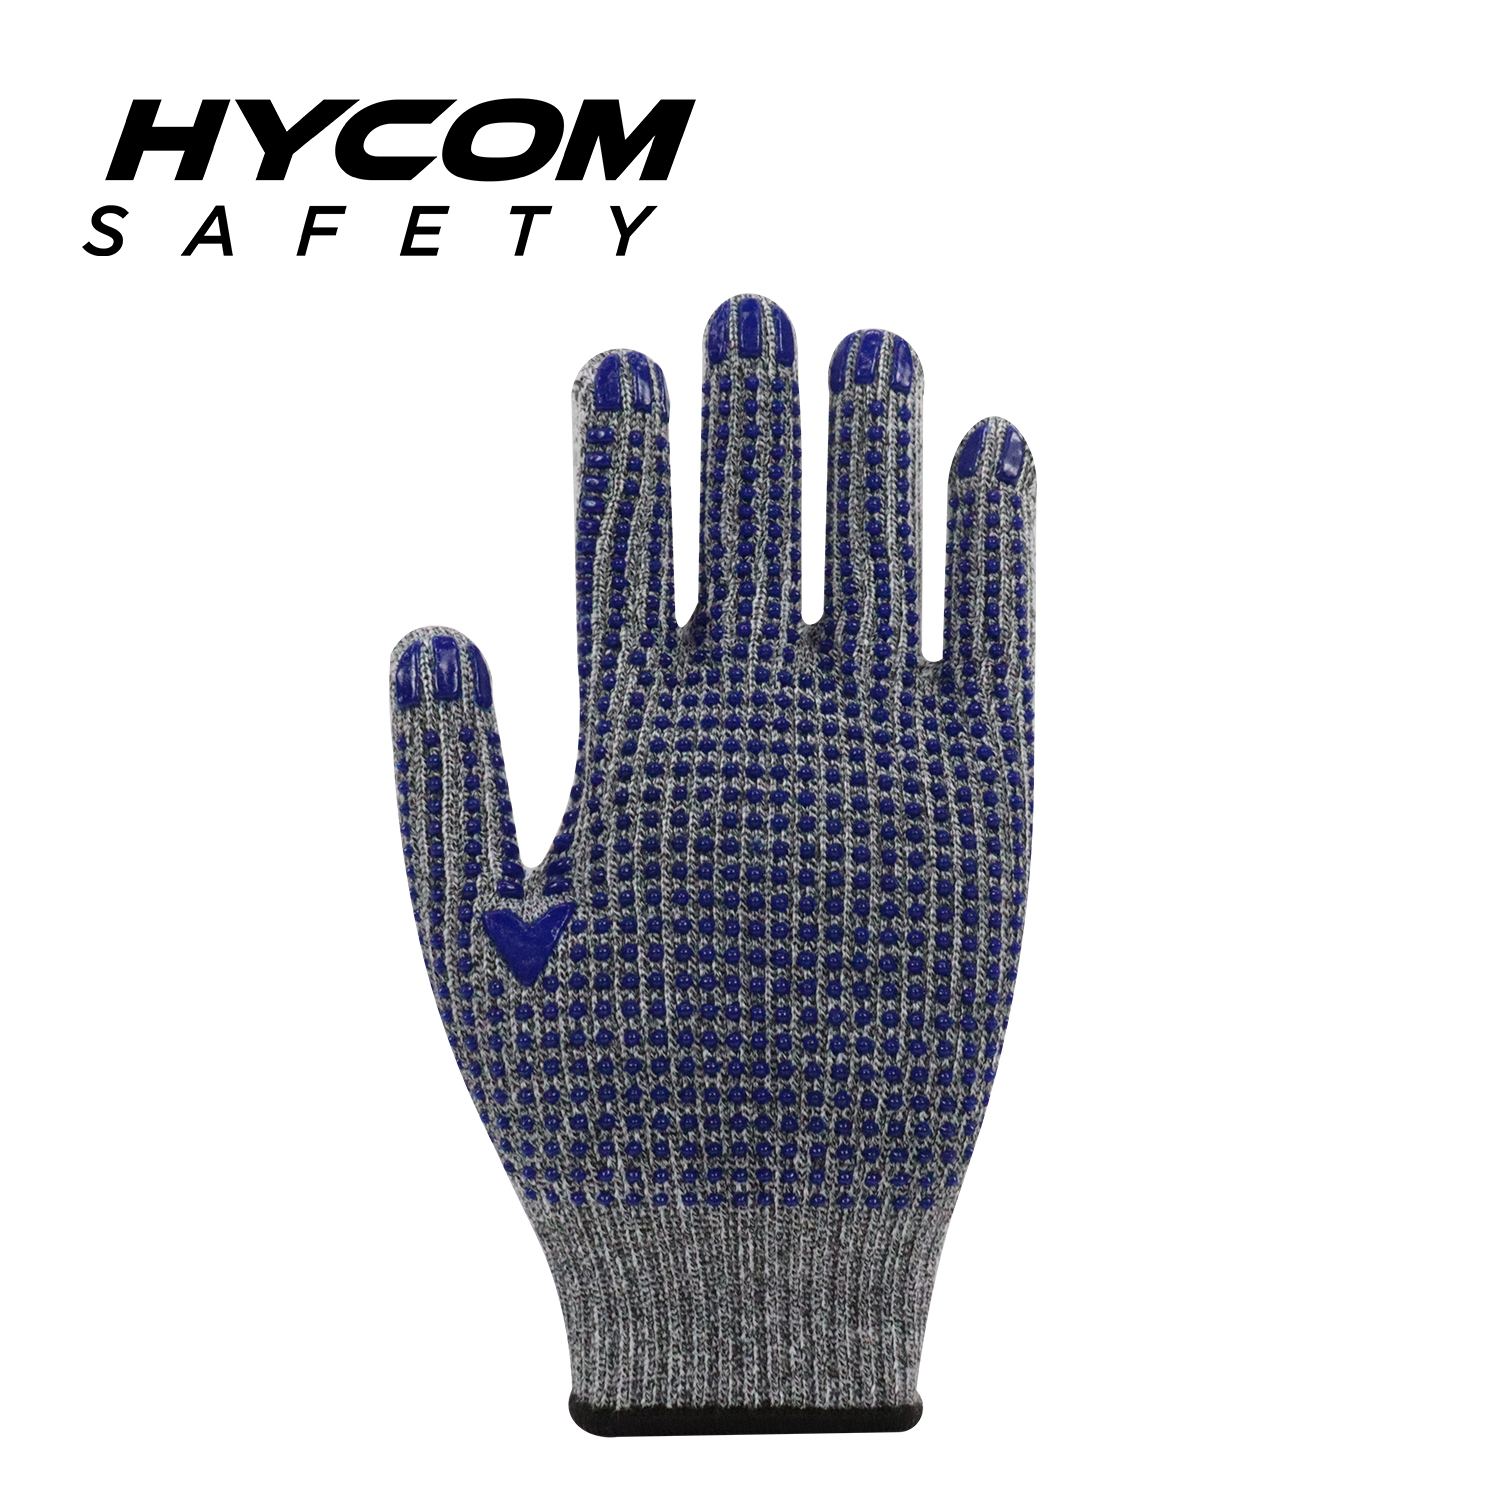 HYCOM 10G ANSI 3 cut resistant glove with palm PVC dots